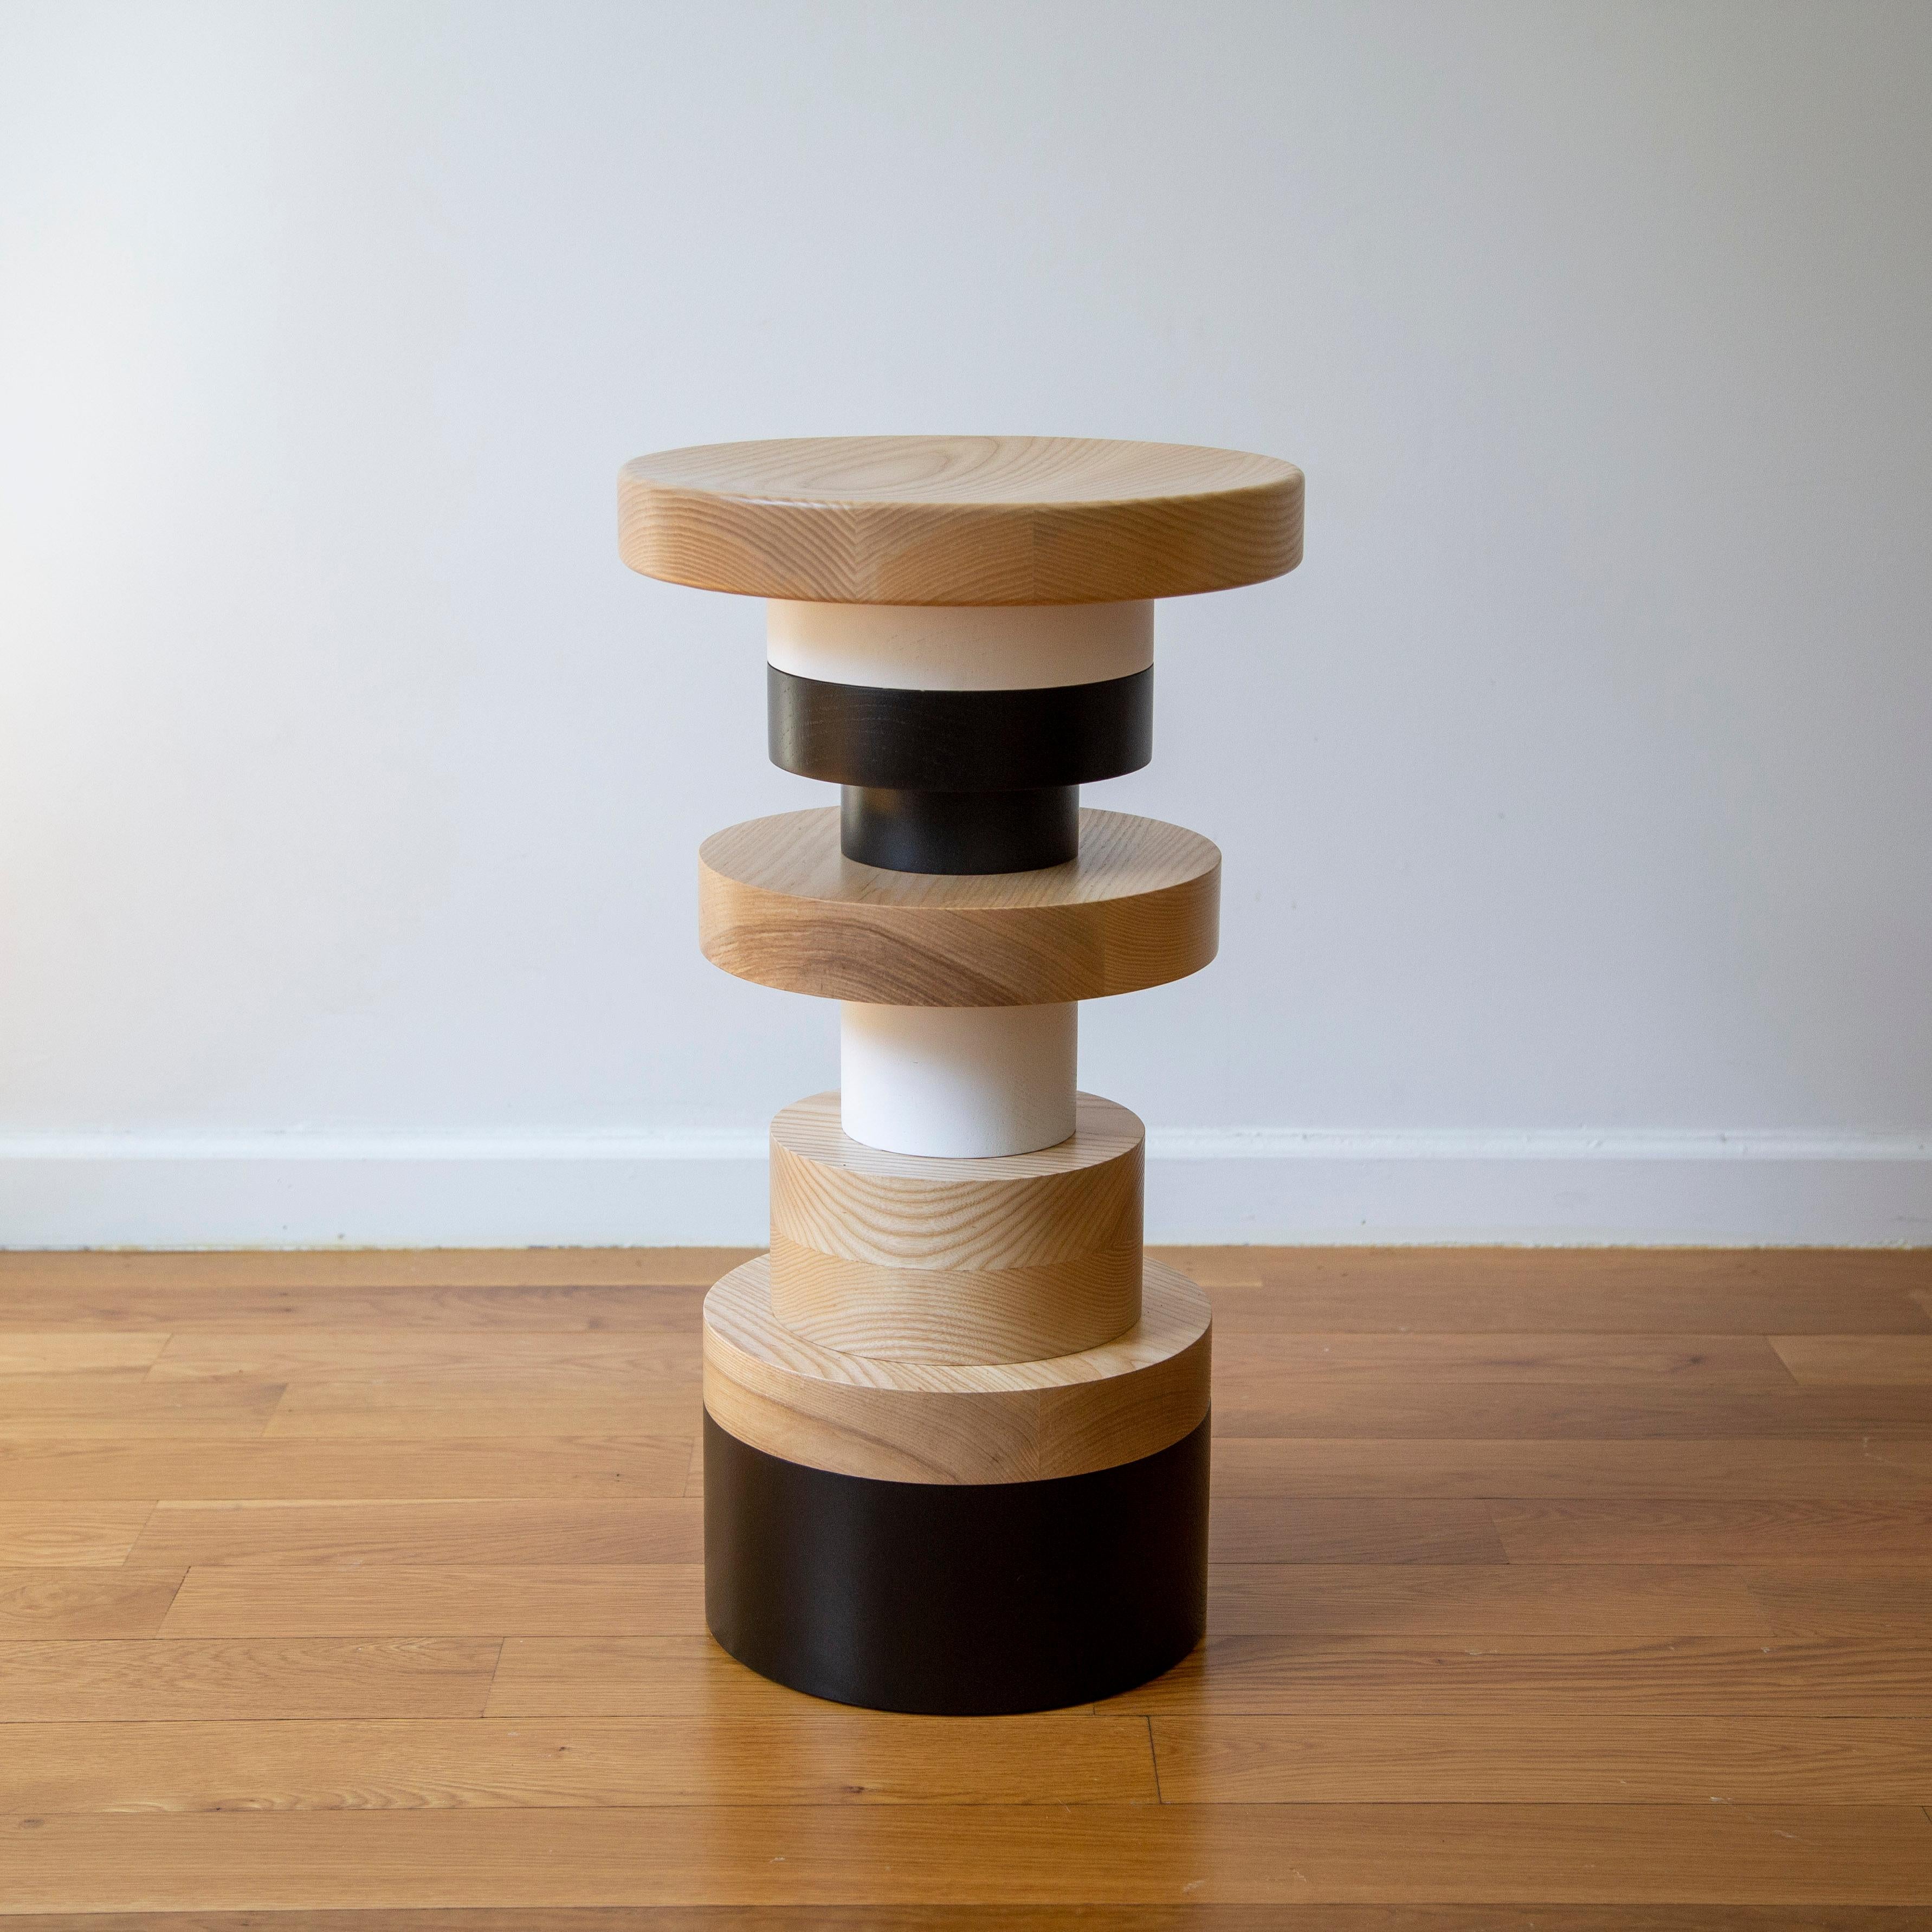 This listing is for 1 Sass stool from Souda. We offer three different shapes (A, B, & C). This listing is for 'C', which is the stool in the first image.

The Sottsass inspired “Sass Stools” are simple, sculptural accents for any interior space.